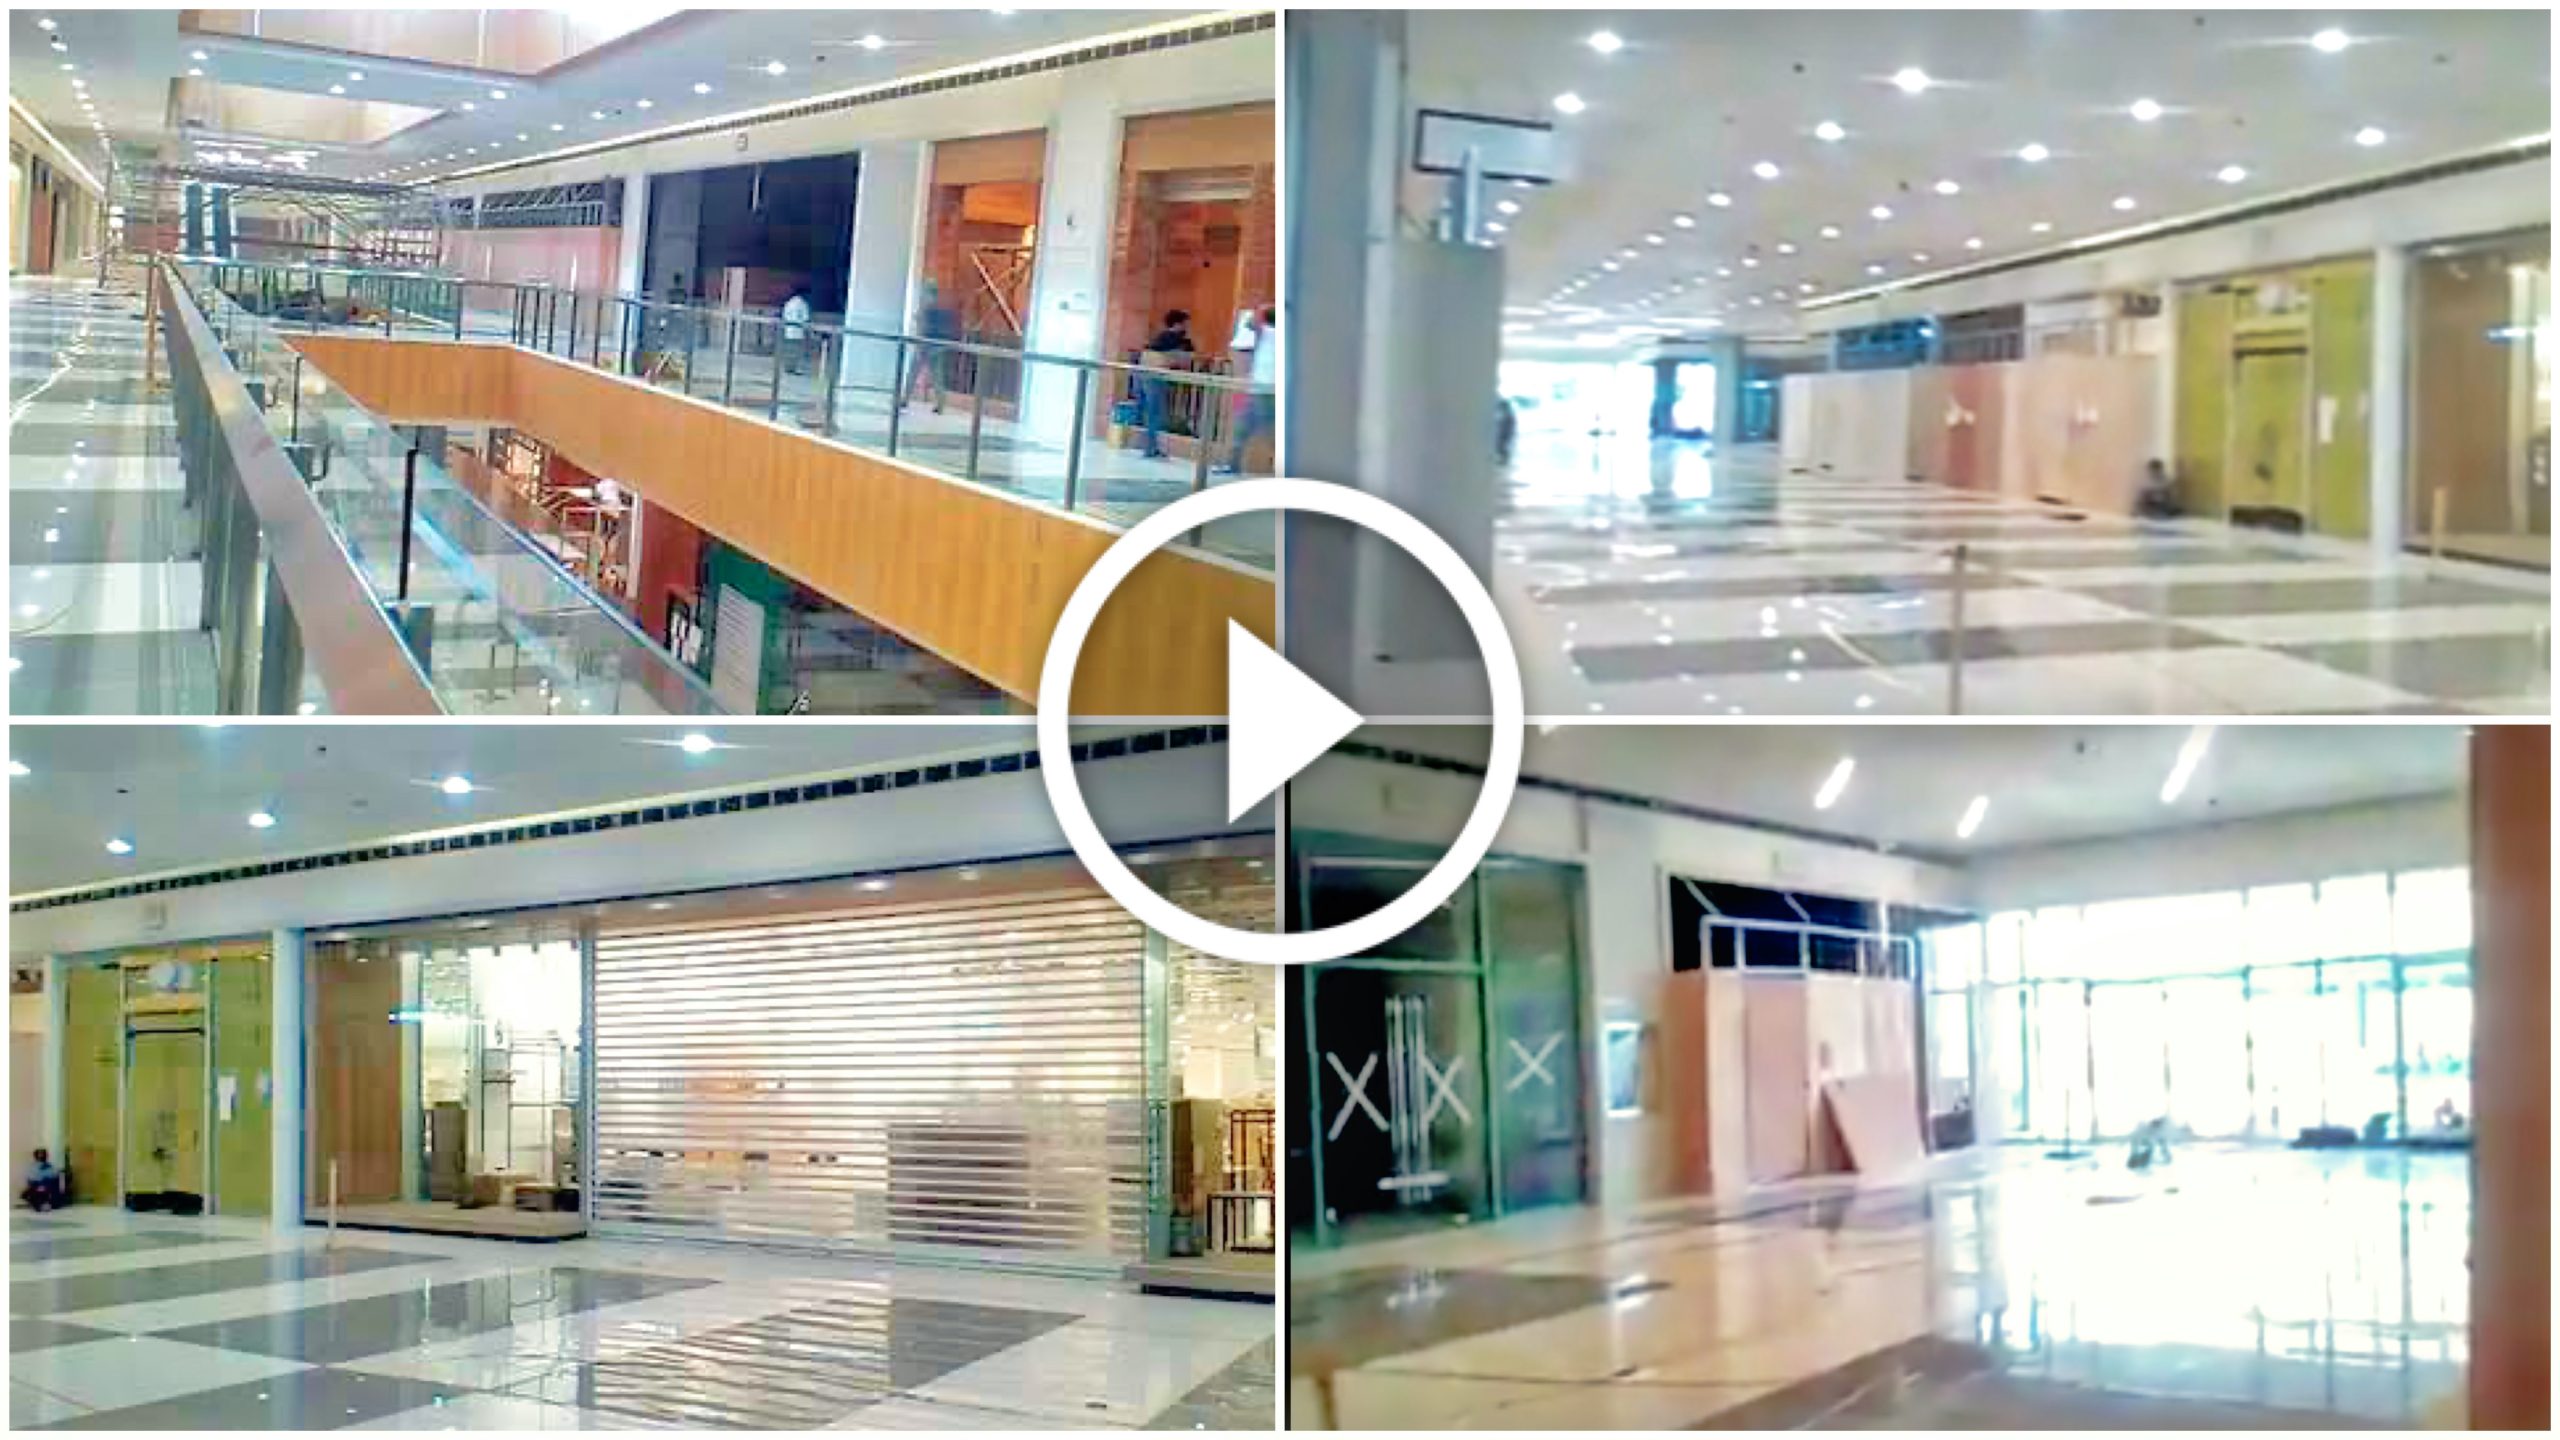 SM City Butuan Sneak Preview Inside the Mall as of March 2020